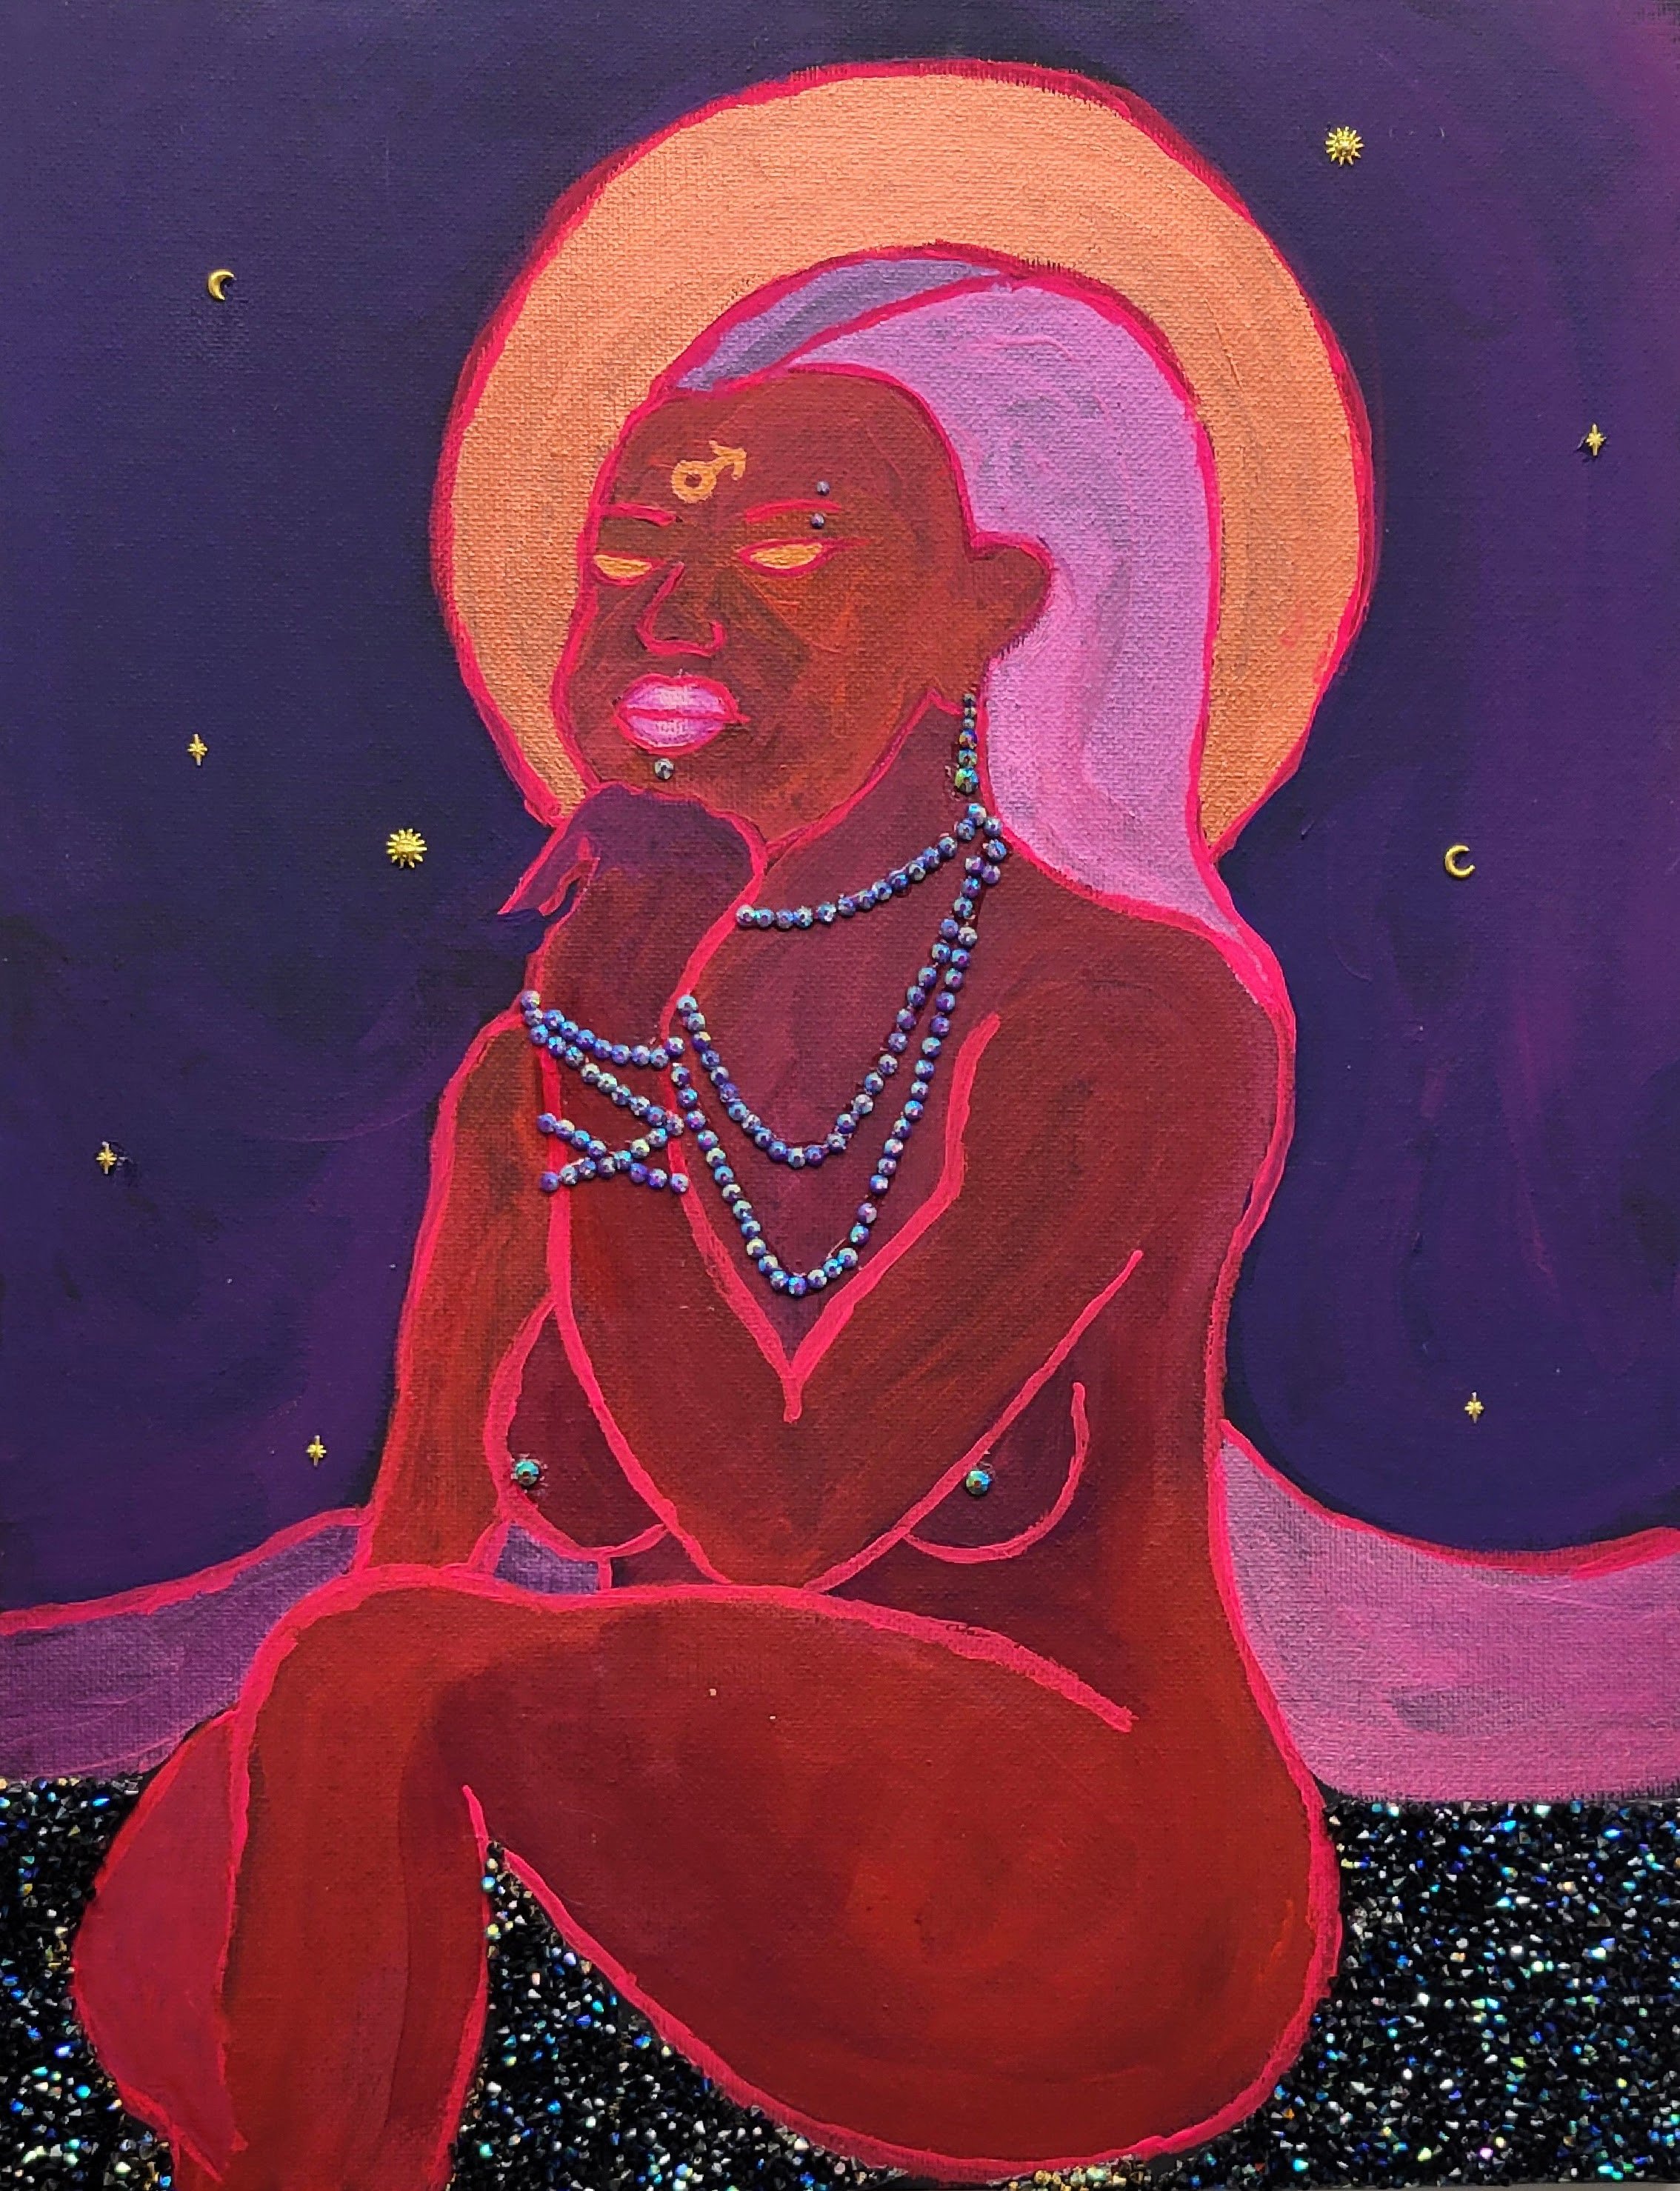   Phobos can’t be bothered: A trans-femme ballad of self love  (Detail)  2023  Acrylic, gouache, and rhinestones, on canvas board     